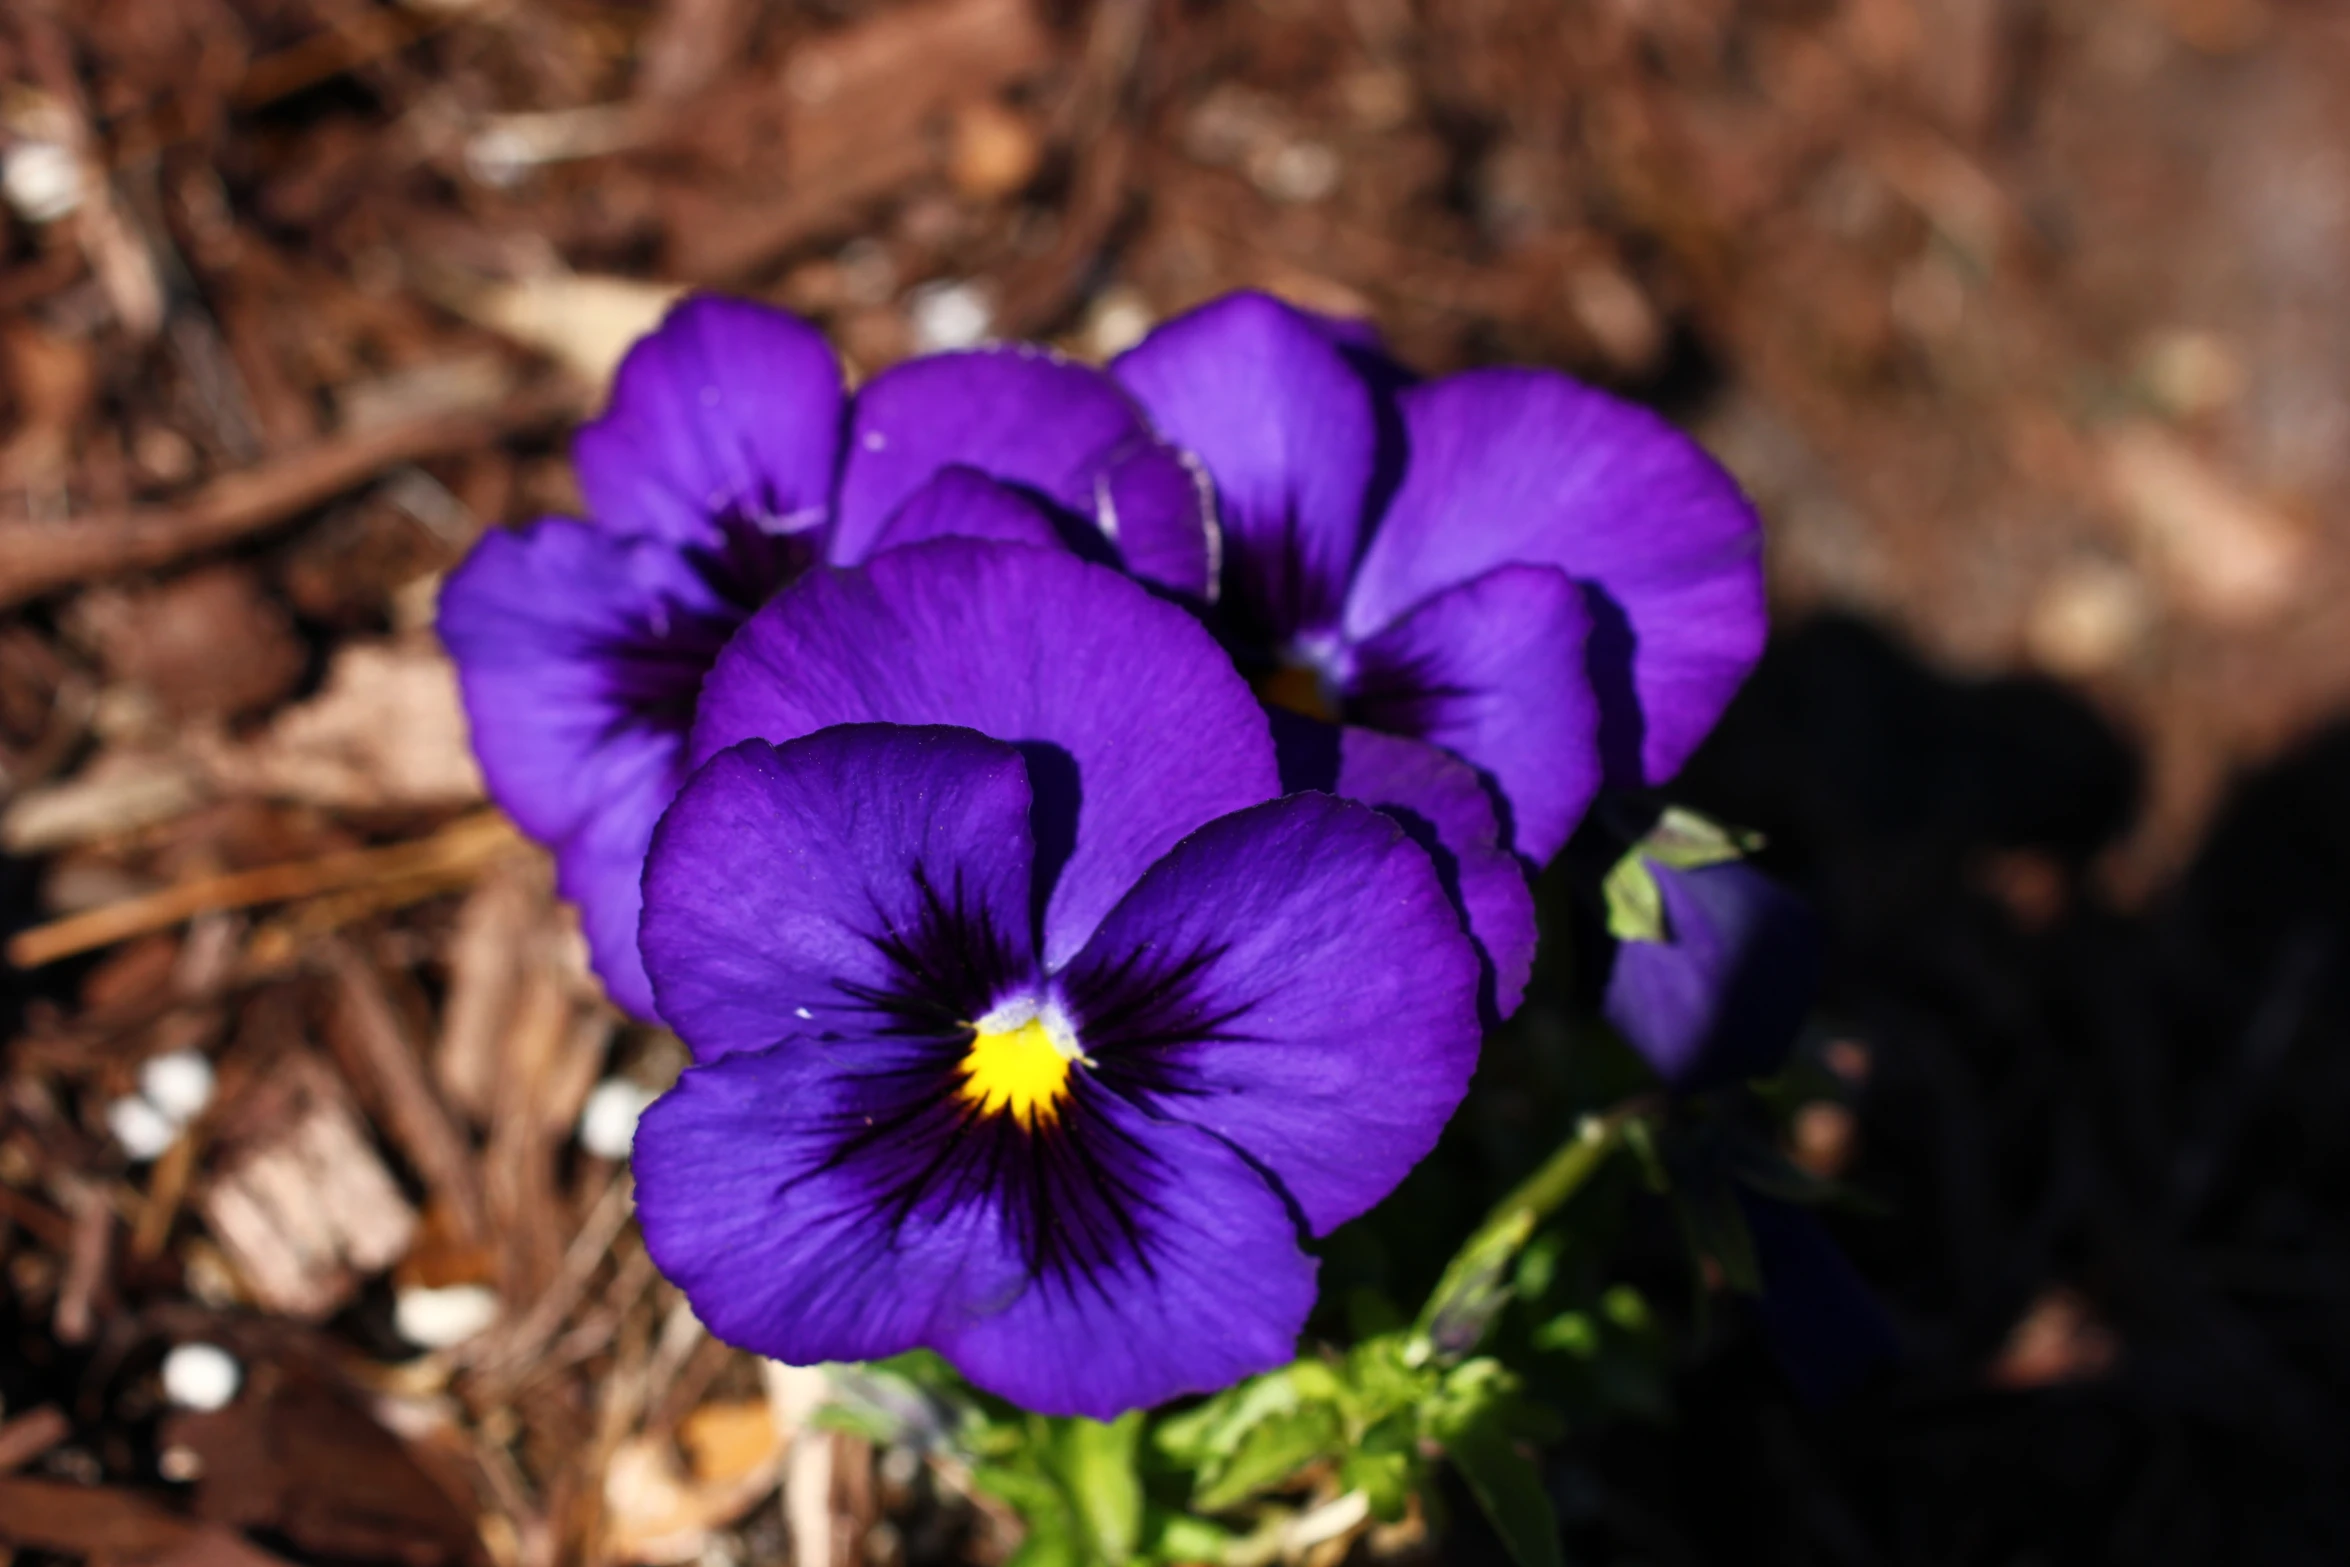 flowers in the sunlight on the ground, some purple